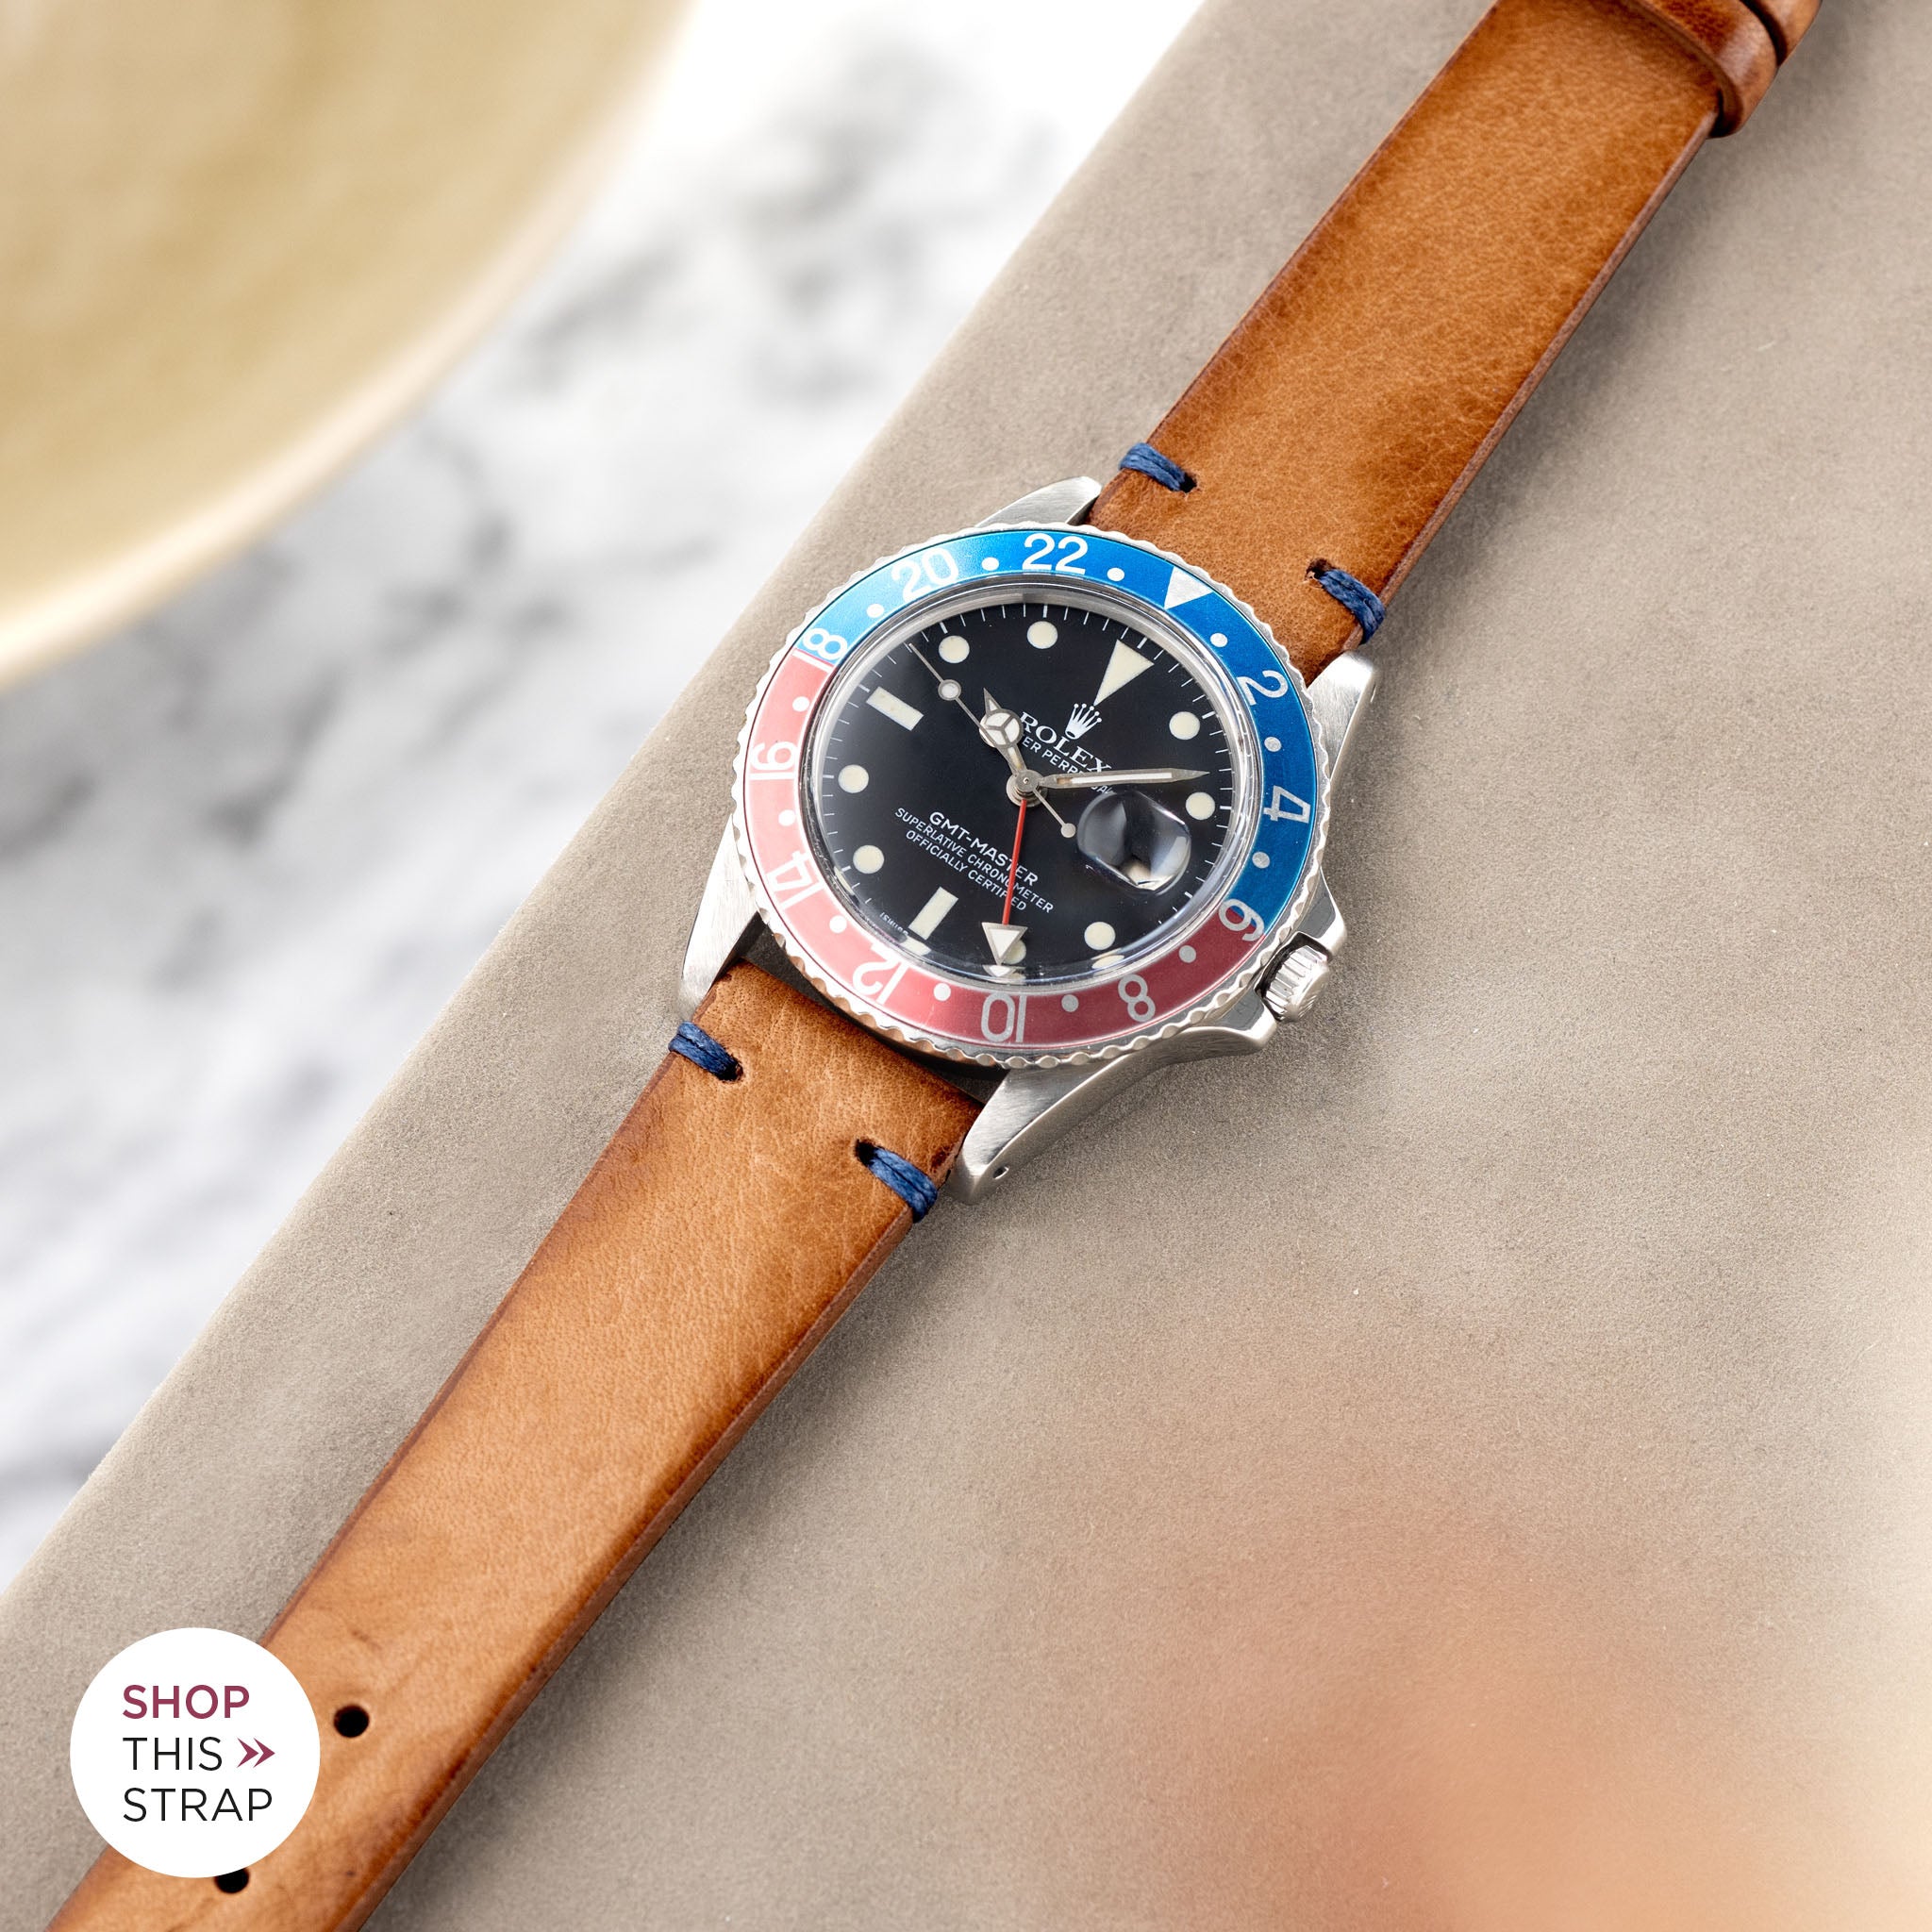 Rolex 1675 GMT Pepsi Bezel Faded Leather Strap Guide